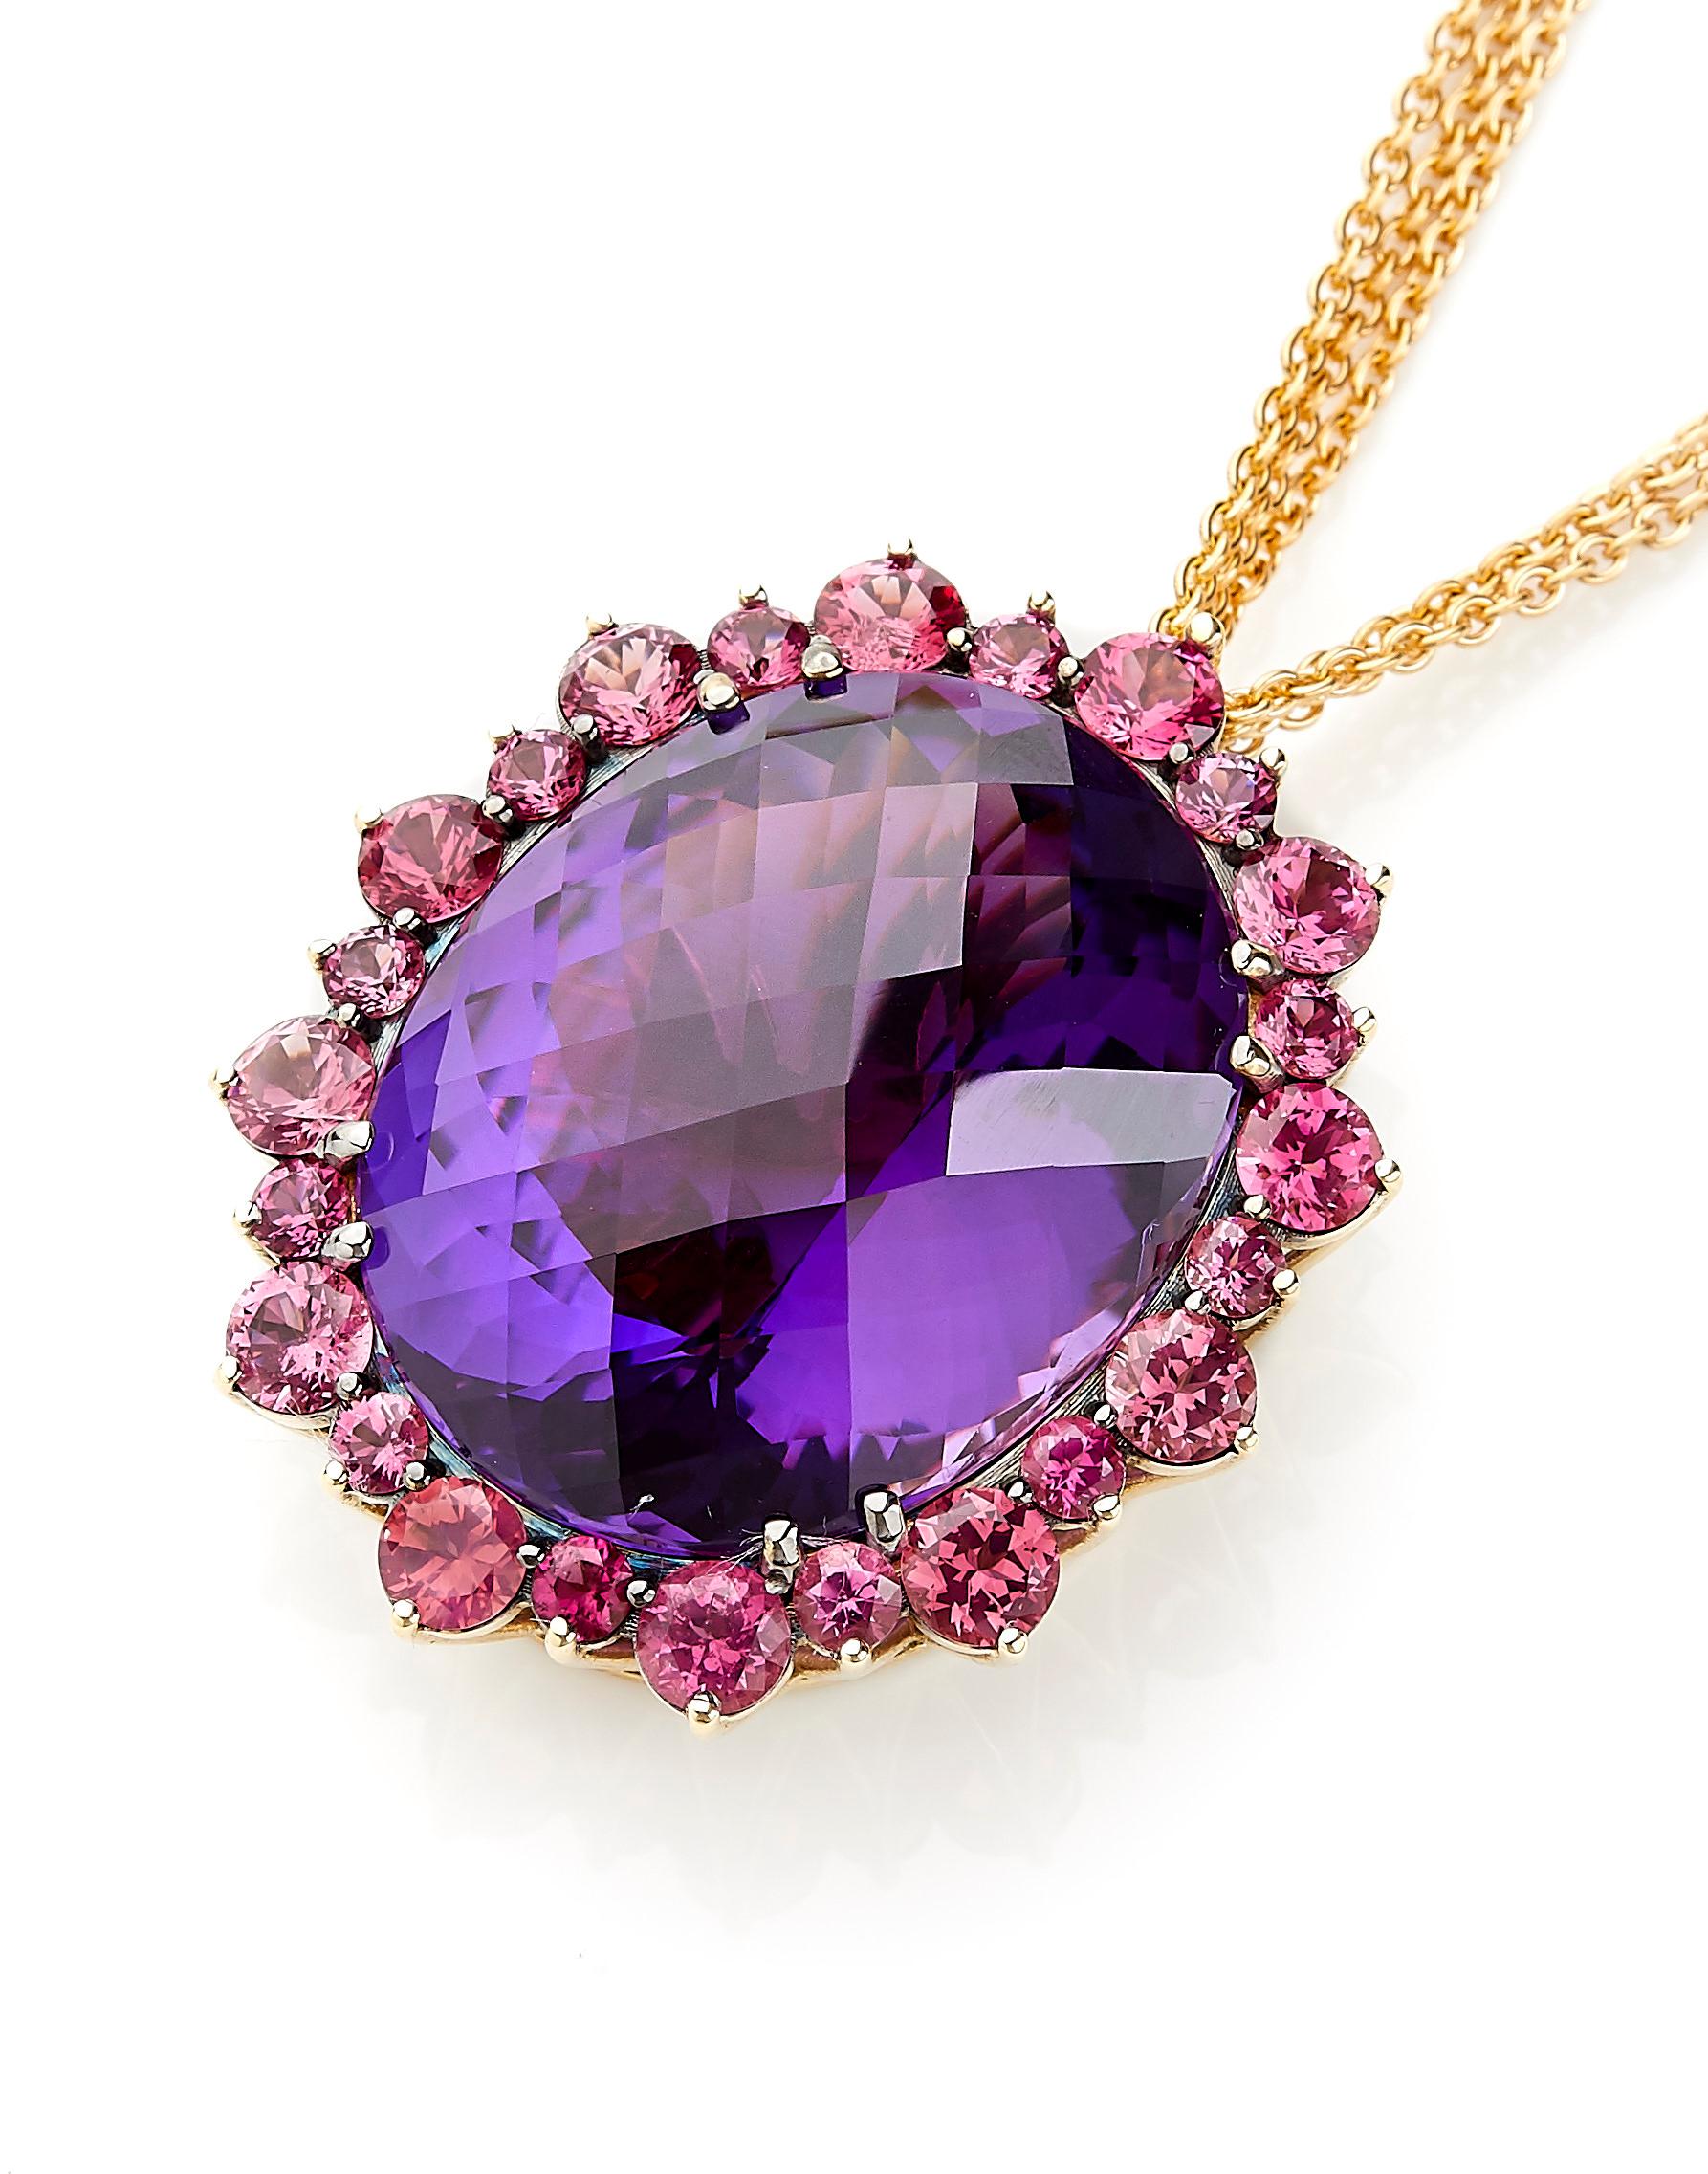 Contemporary 18 Karat Yellow Gold Pendant Necklace with 49.13 Carat Amethyst and Spinels For Sale